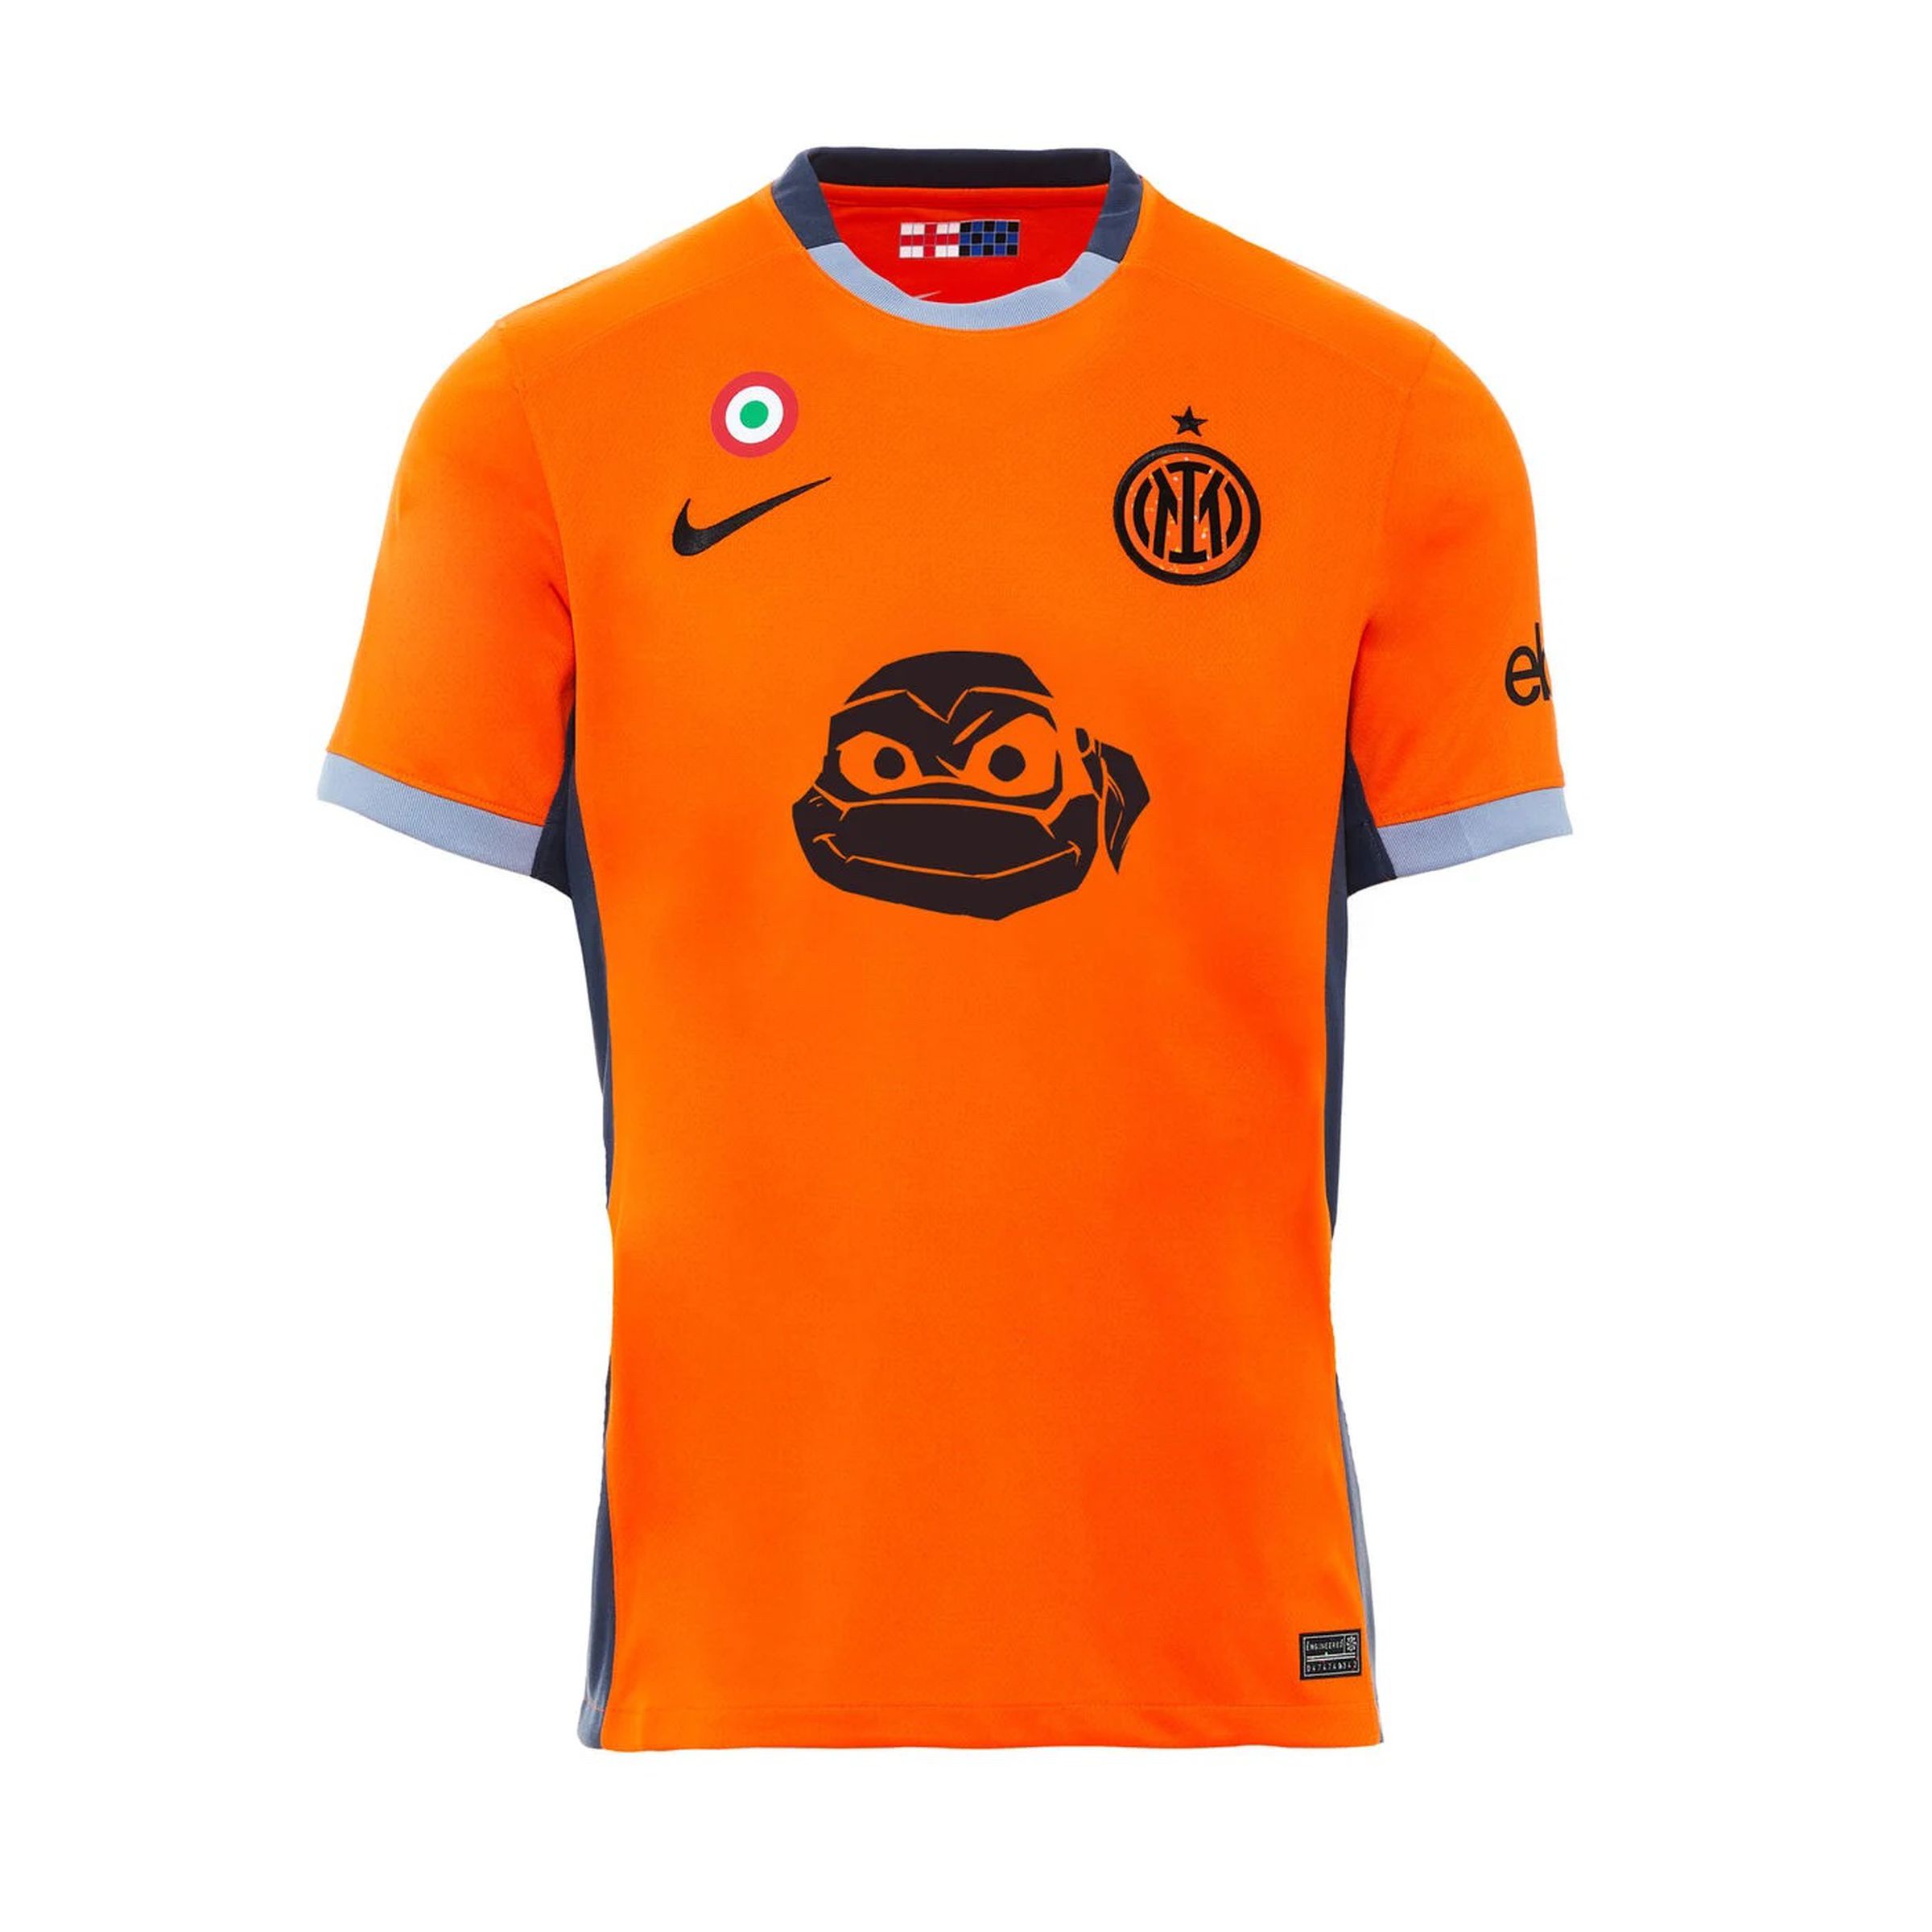 An Inter Milan soccer jersey with a Ninja Turtle on it.